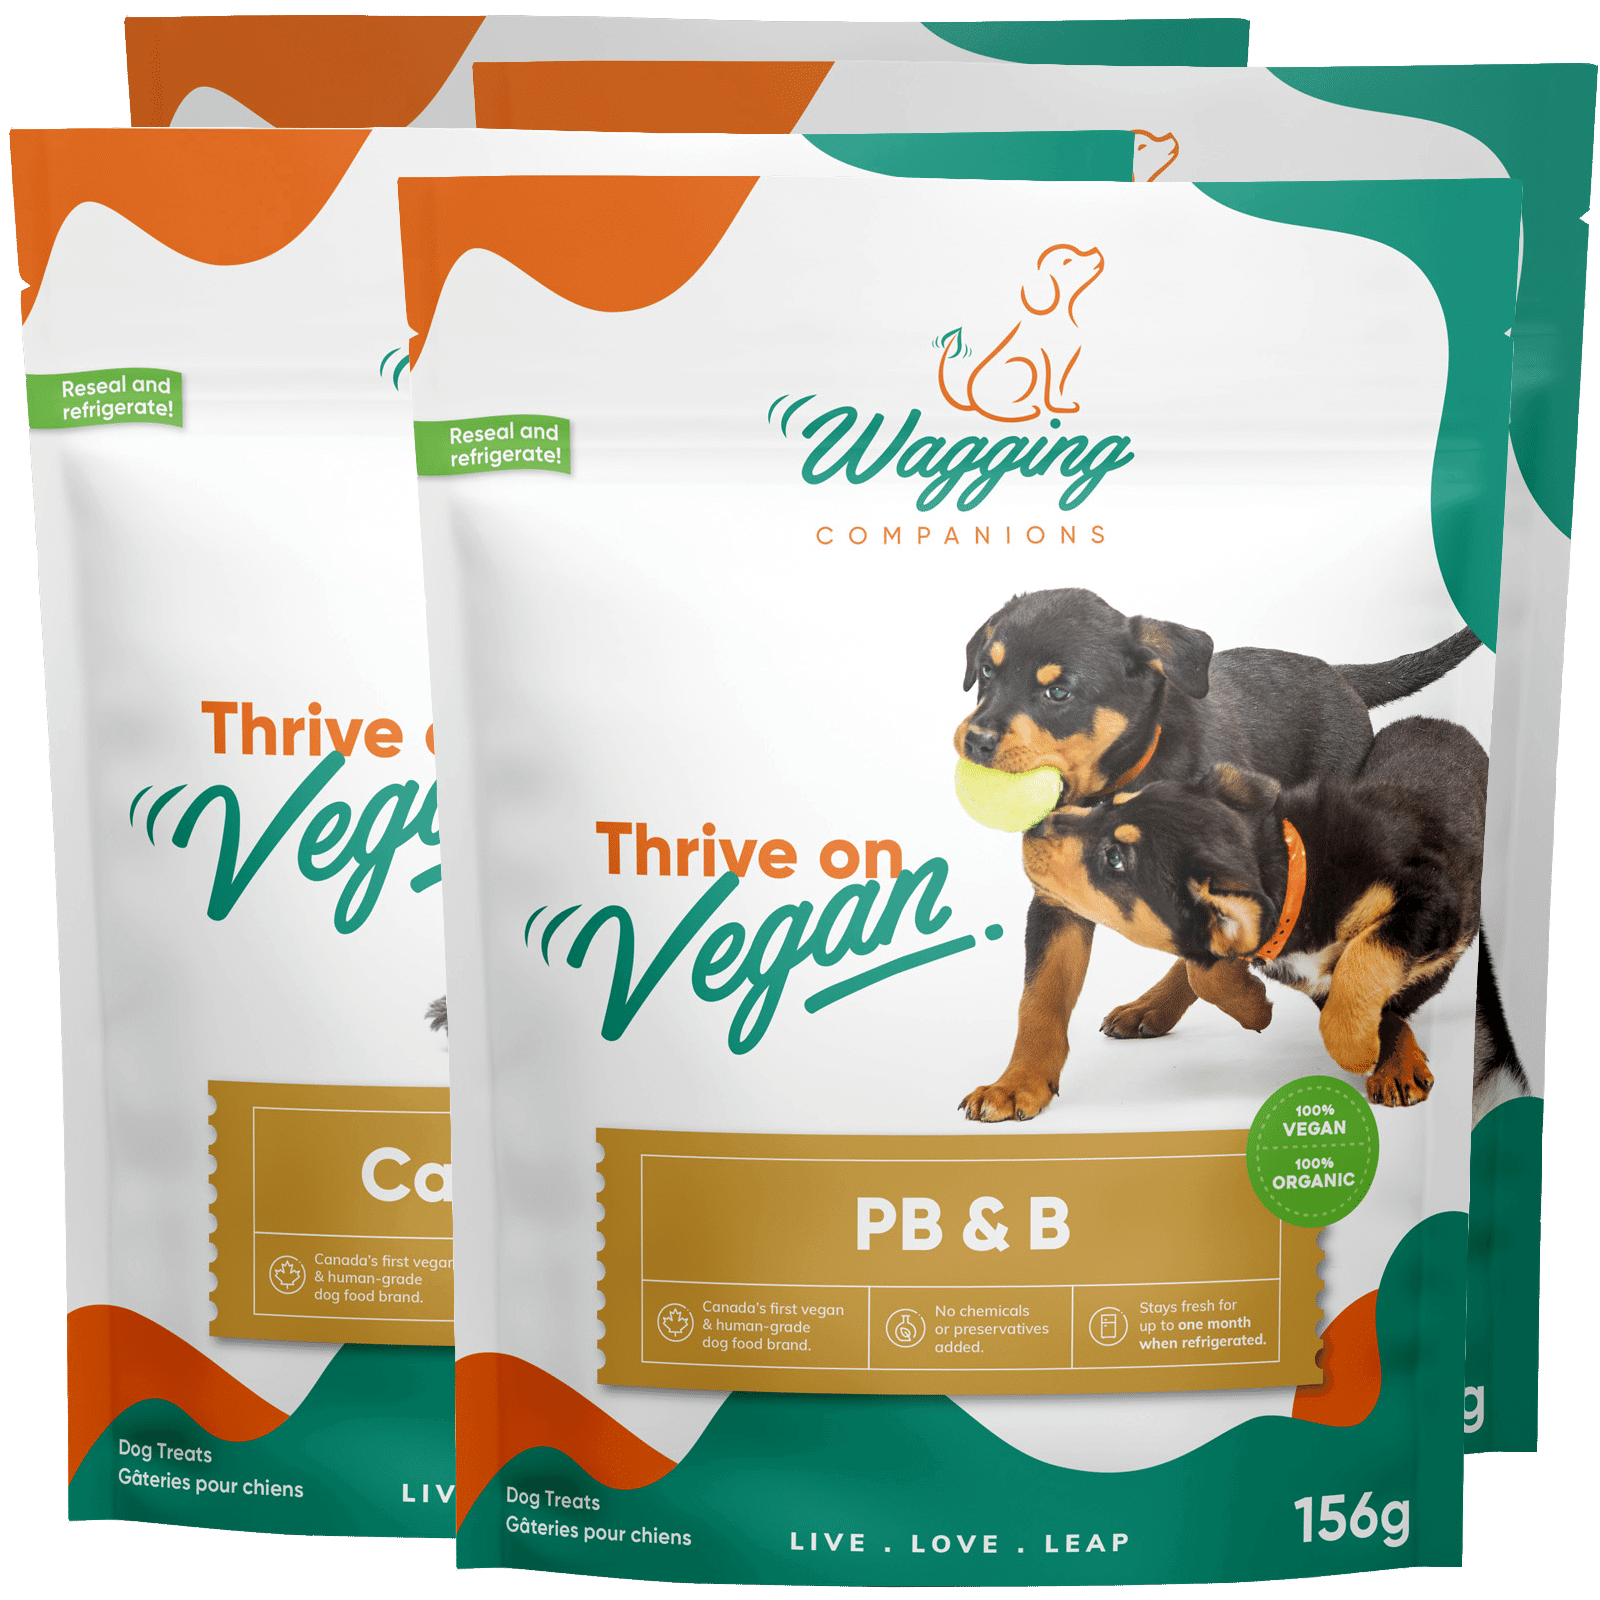 Front view image displaying Wagging Companions' four main blends in their respective packaging (all vegan). The image showcases the diverse range of blends available, featuring the brand's offerings in their distinct packaging, each representing a unique flavor profile tailored for canine preferences.